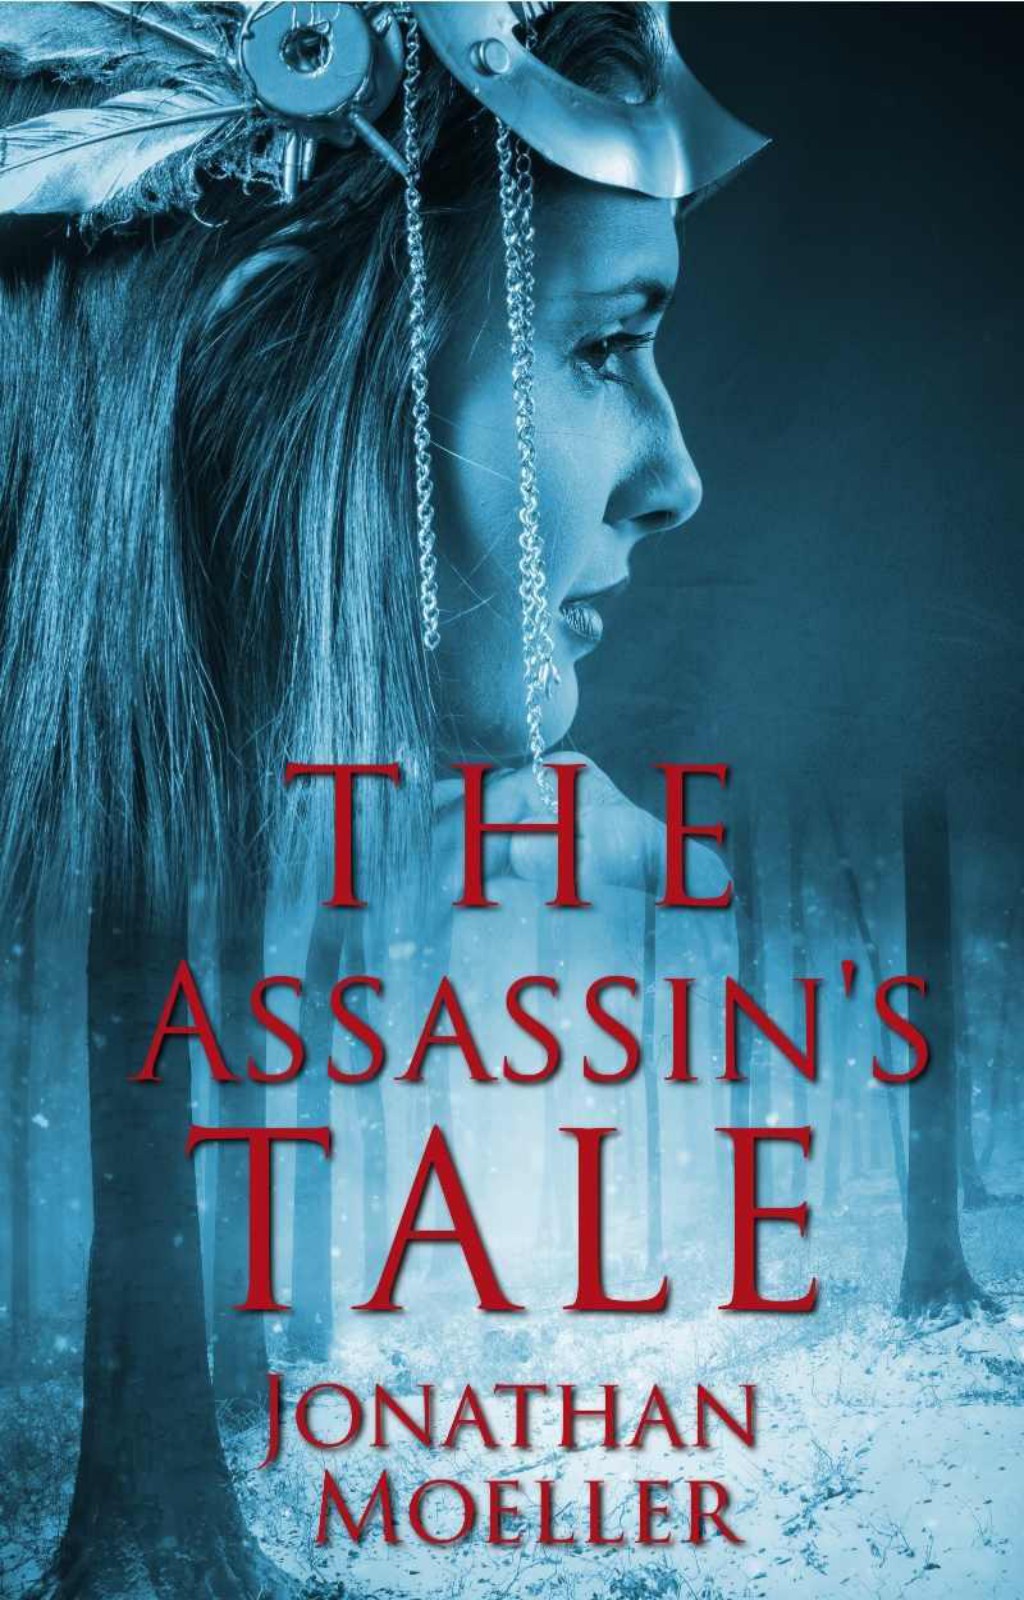 The Assassin's Tale by Jonathan Moeller